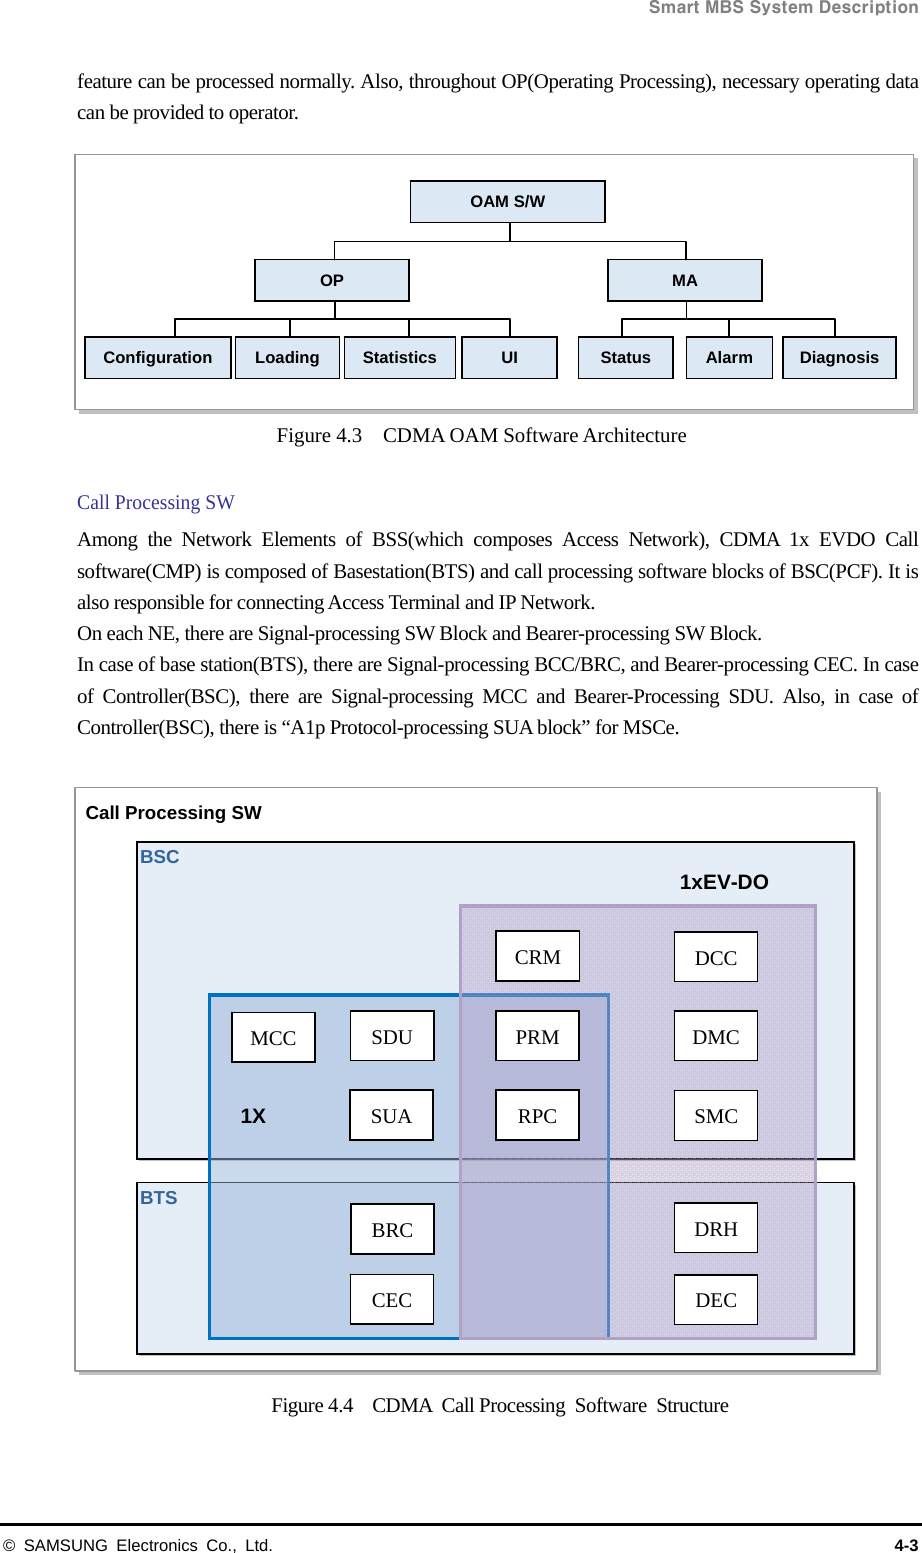  Smart MBS System Description © SAMSUNG Electronics Co., Ltd.  4-3 feature can be processed normally. Also, throughout OP(Operating Processing), necessary operating data can be provided to operator. Figure 4.3  CDMA OAM Software Architecture  Call Processing SW Among the Network Elements of BSS(which composes Access Network), CDMA 1x EVDO Call software(CMP) is composed of Basestation(BTS) and call processing software blocks of BSC(PCF). It is also responsible for connecting Access Terminal and IP Network. On each NE, there are Signal-processing SW Block and Bearer-processing SW Block. In case of base station(BTS), there are Signal-processing BCC/BRC, and Bearer-processing CEC. In case of Controller(BSC), there are Signal-processing MCC and Bearer-Processing SDU. Also, in case of Controller(BSC), there is “A1p Protocol-processing SUA block” for MSCe.  Figure 4.4  CDMA Call Processing Software Structure BSC Call Processing SW BTS MCC  SDU SUA DCC DMC CRMRPC  SMC PRM1xEV-DO 1X BRC CEC DRH DEC OAM S/W OP  MA Configuration  Alarm Loading  Statistics UI  Status  Diagnosis